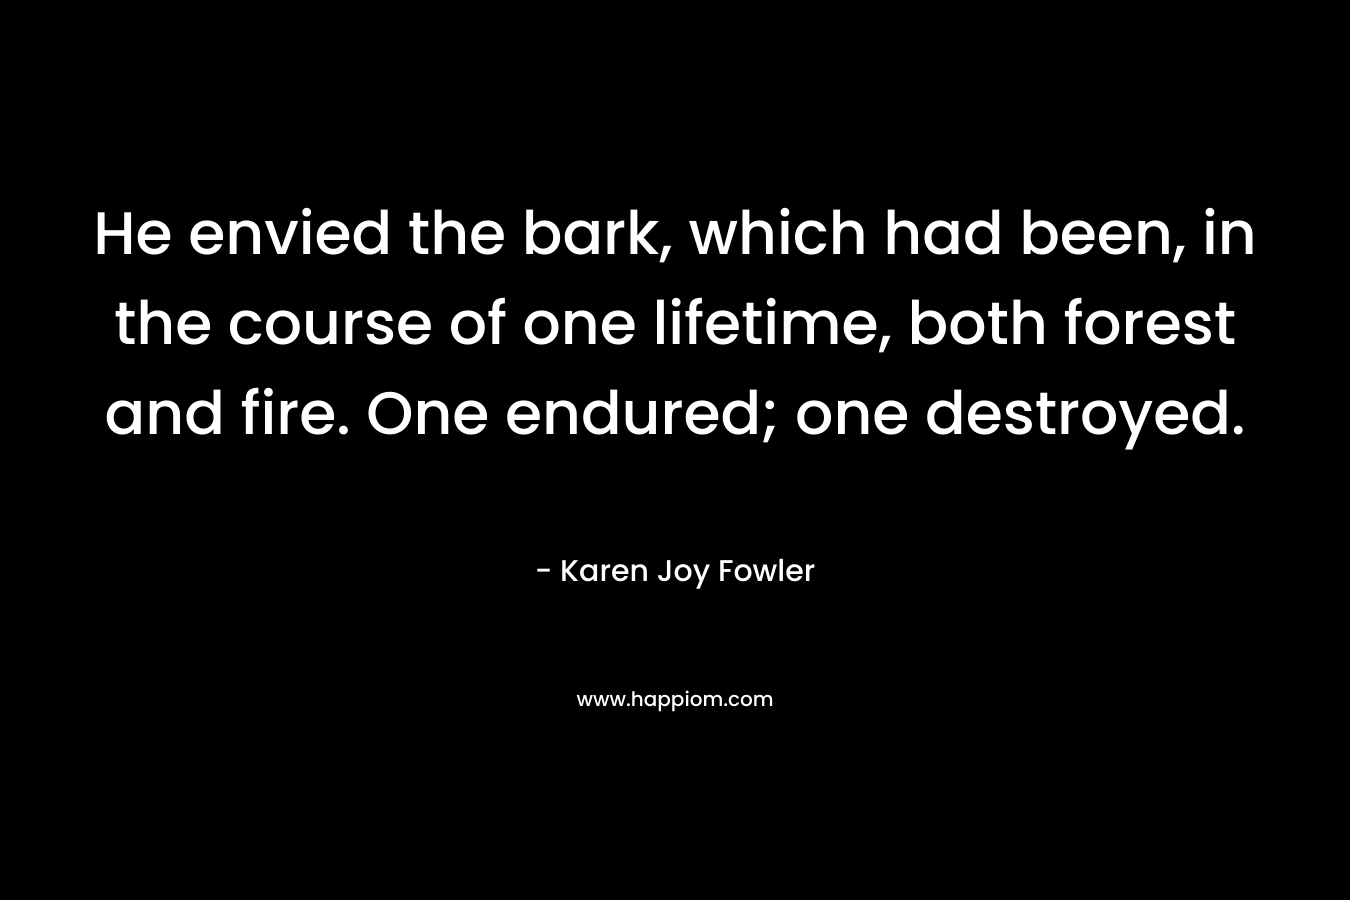 He envied the bark, which had been, in the course of one lifetime, both forest and fire. One endured; one destroyed. – Karen Joy Fowler